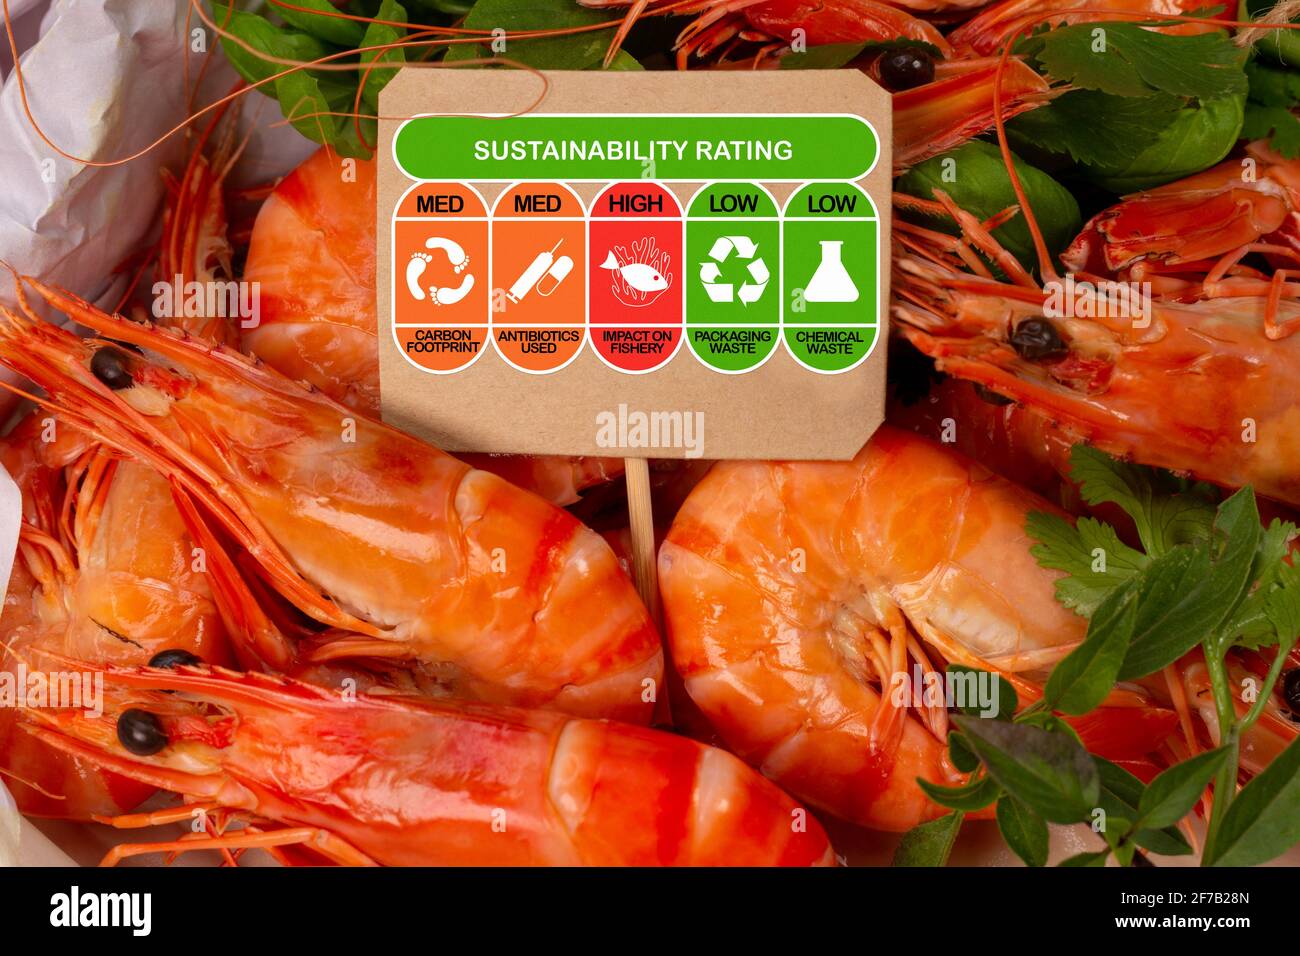 Environmental Impact Rating on prawns with high, med and low ratings for food carbon footprint, antibiotics used, impact on fishery, packaging waste a Stock Photo